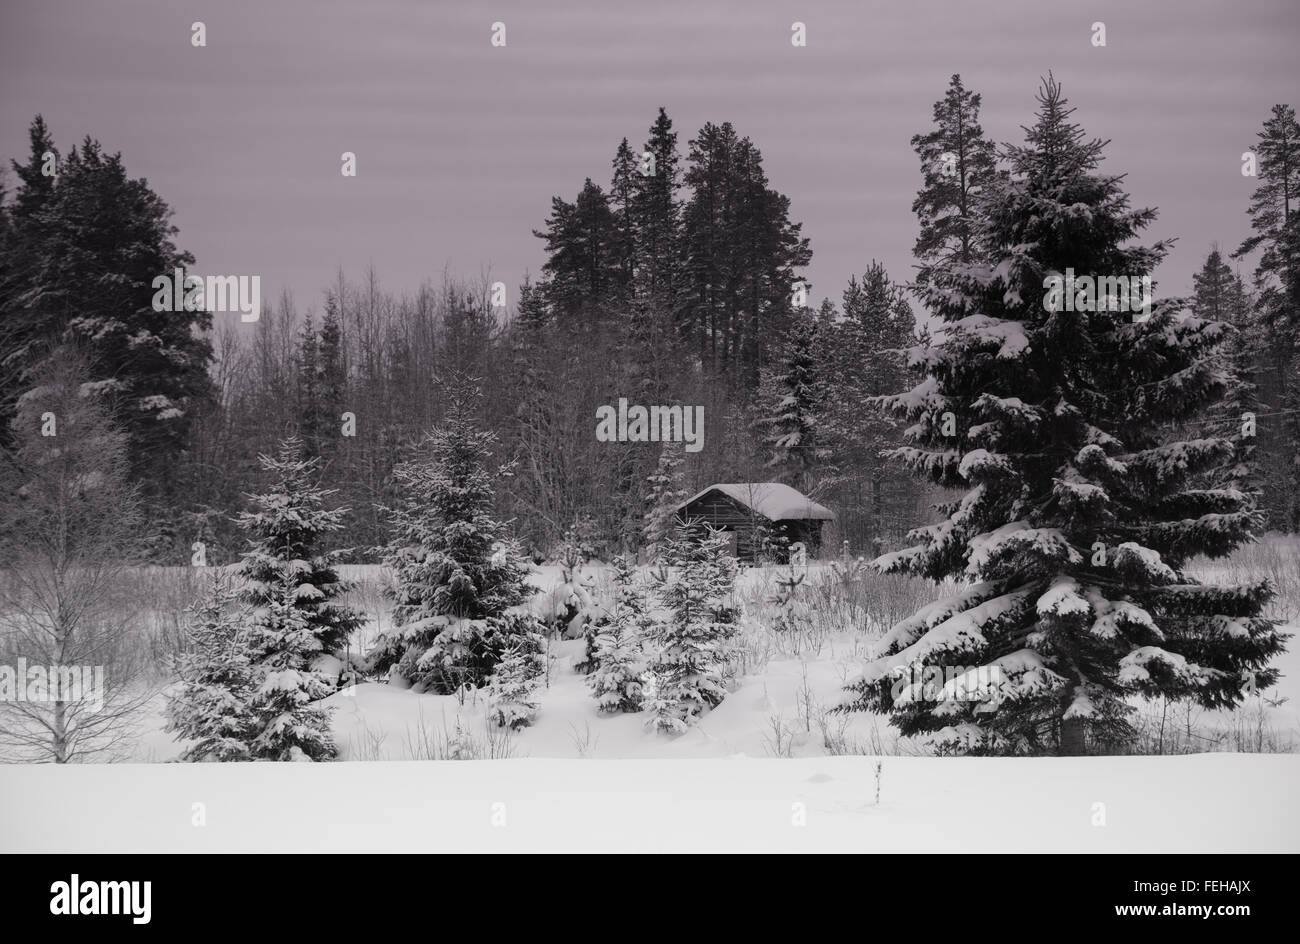 Black & white snow covered pine trees and shed Stock Photo